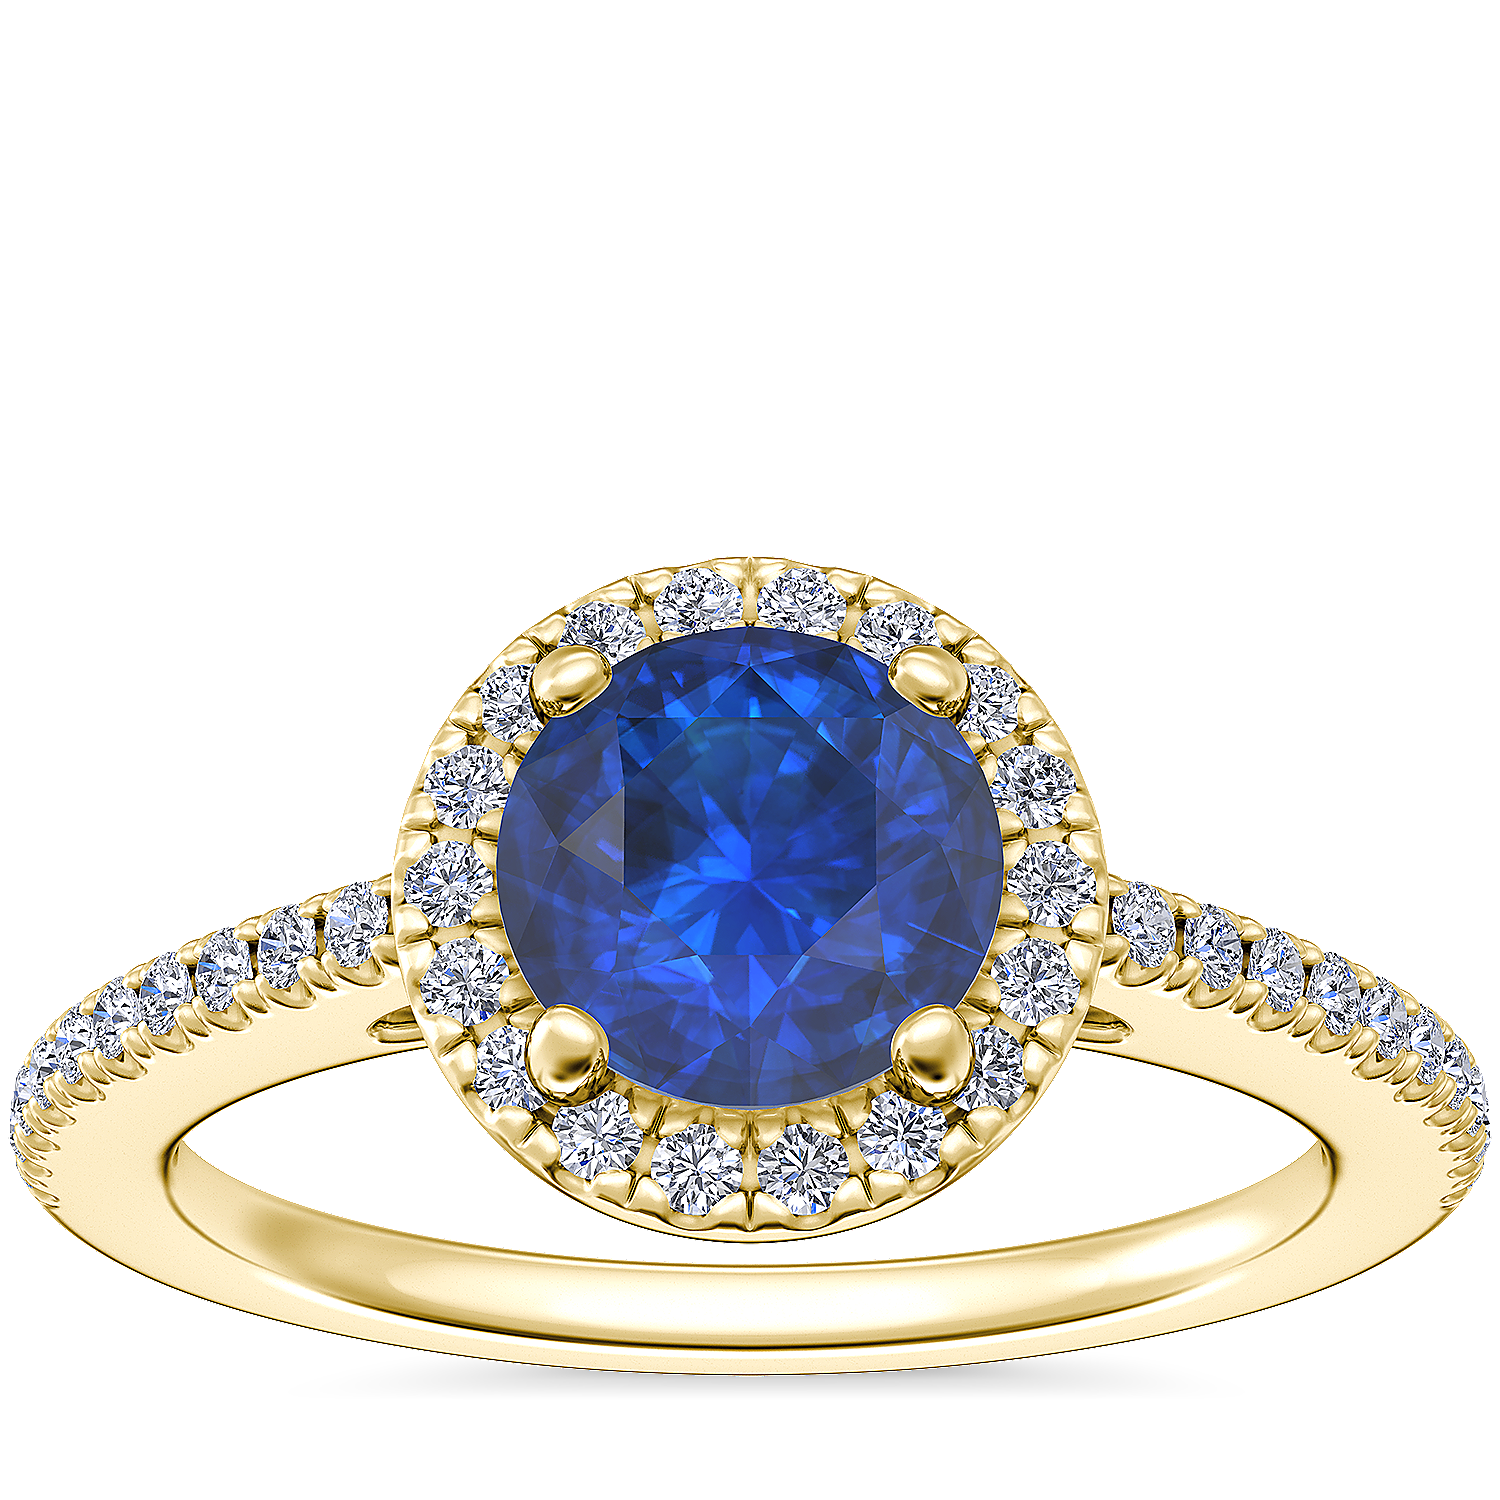 Classic Halo Diamond Engagement Ring with Round Sapphire in 14k Yellow Gold (6mm)